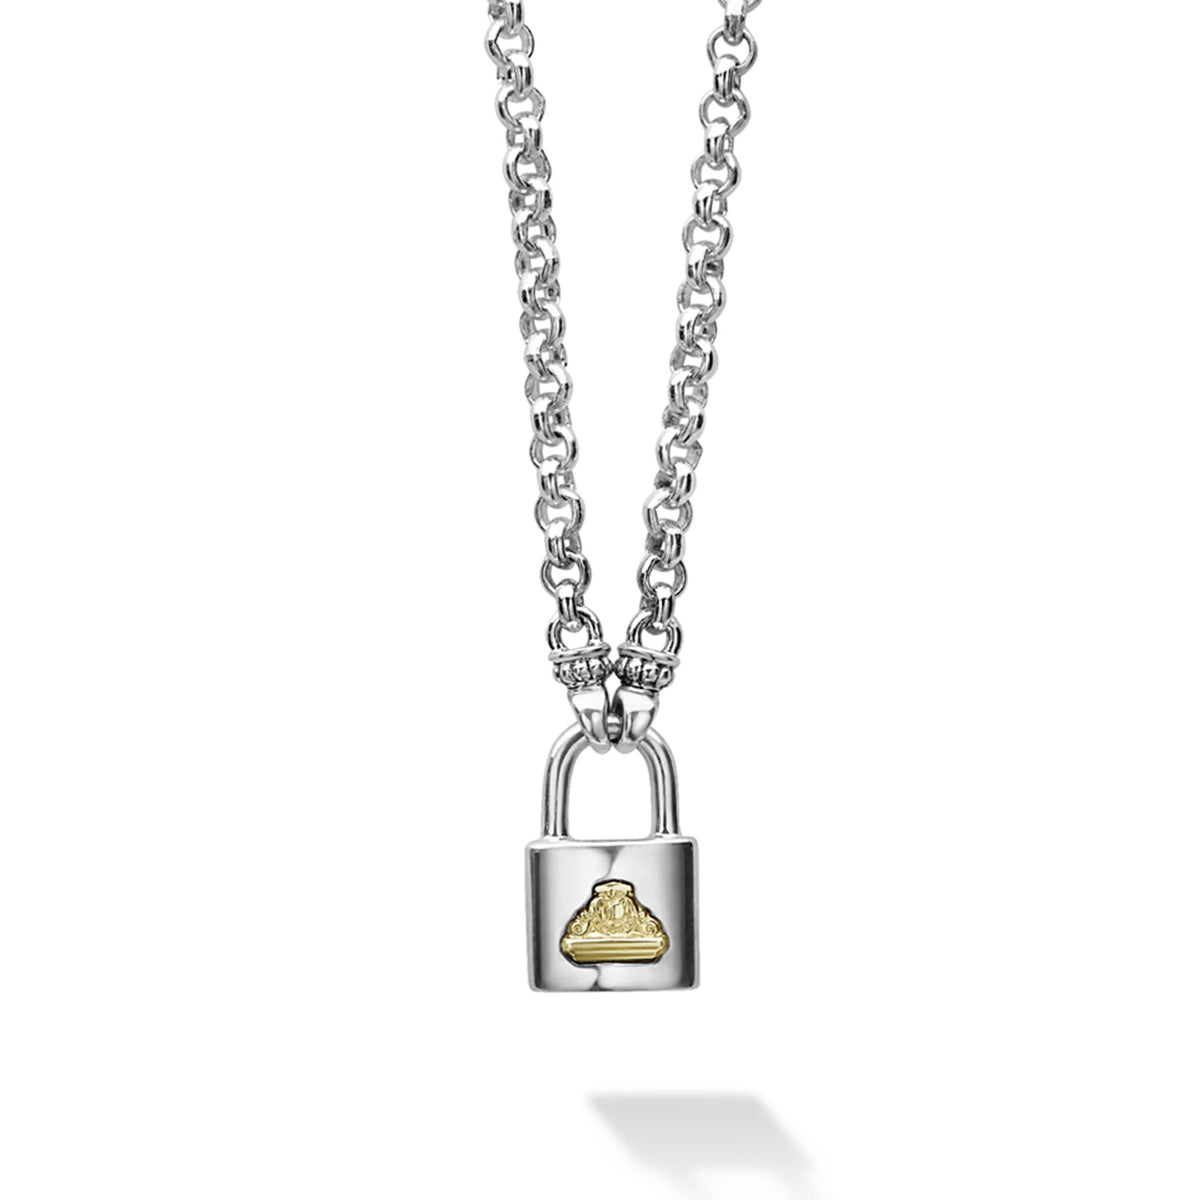 Beloved Petite Two-Tone Lock Necklace